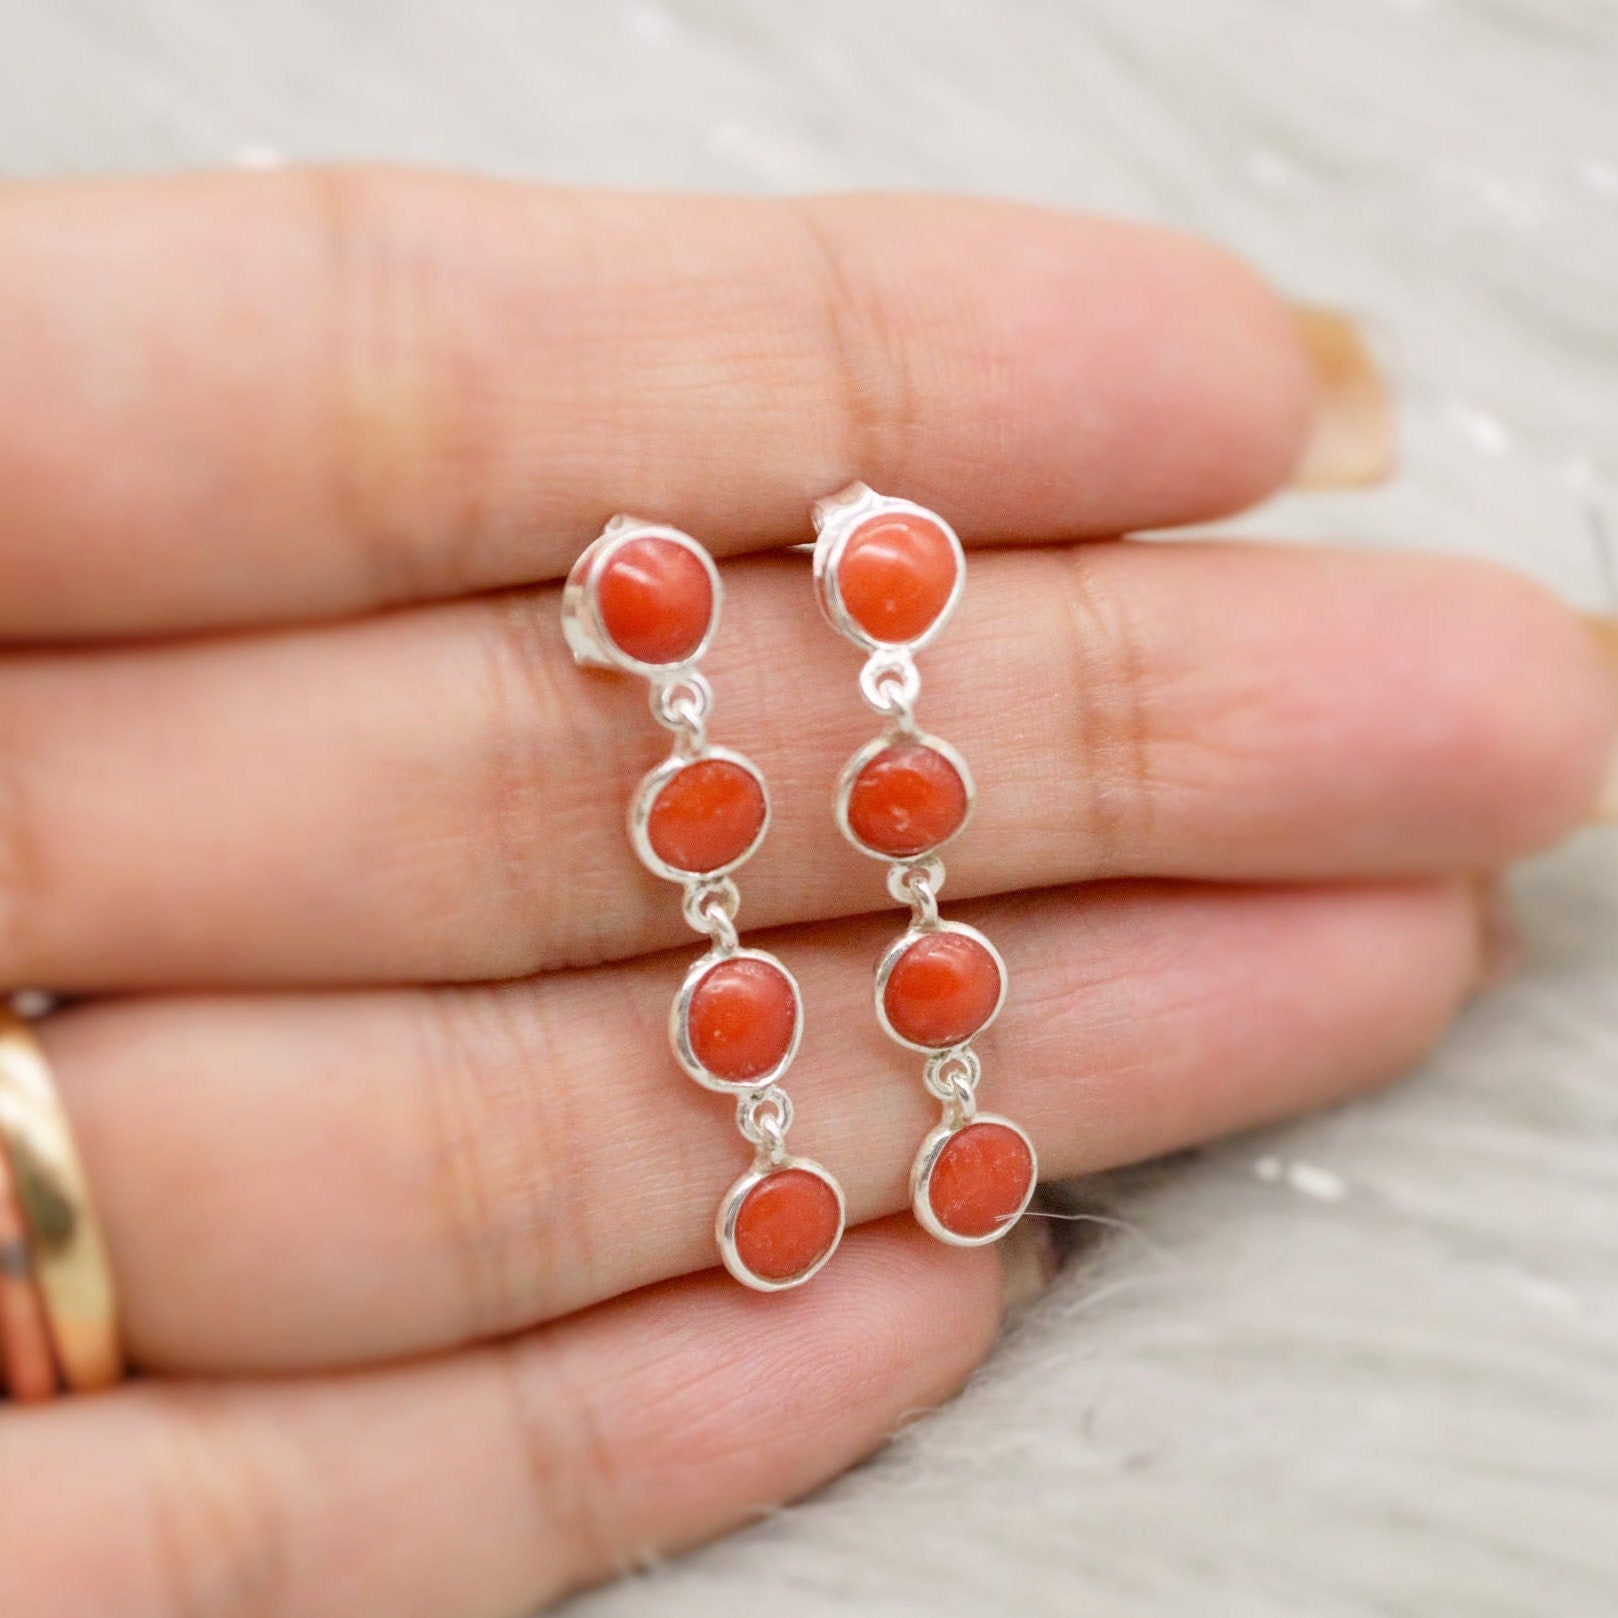 Red Coral Sterling Silver Drop Earrings, Natural Coral Earrings, Unique Dainty Earrings, Red Coral Jewelry, Best Friend Gift For Her,